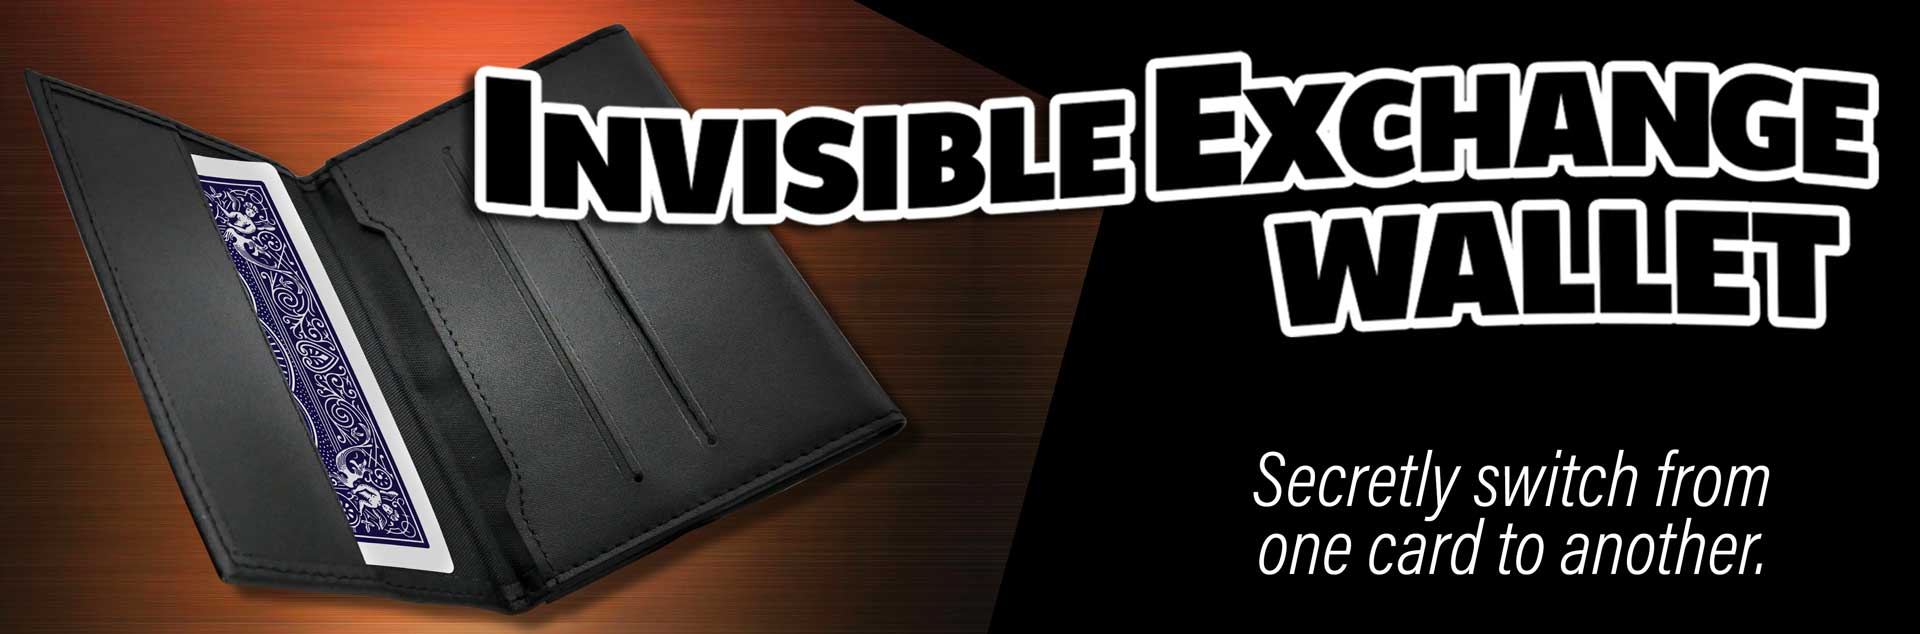 Invisible Exchange Wallet